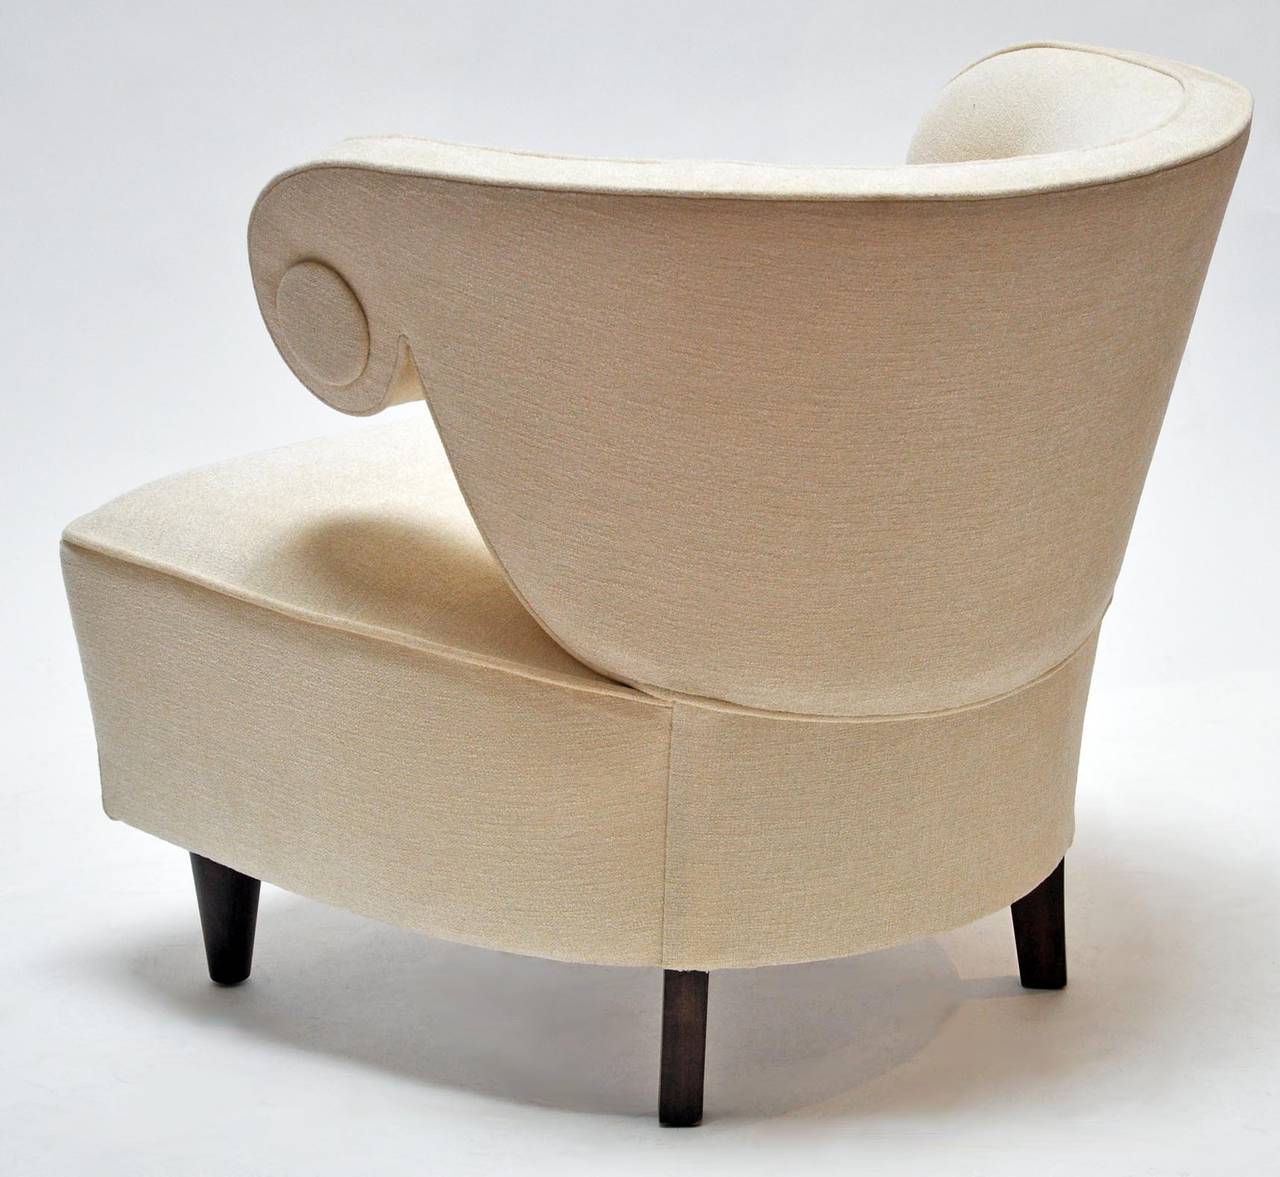 Hand-Crafted Pair of 1950s Upholstered Chairs by Paul Laszlo